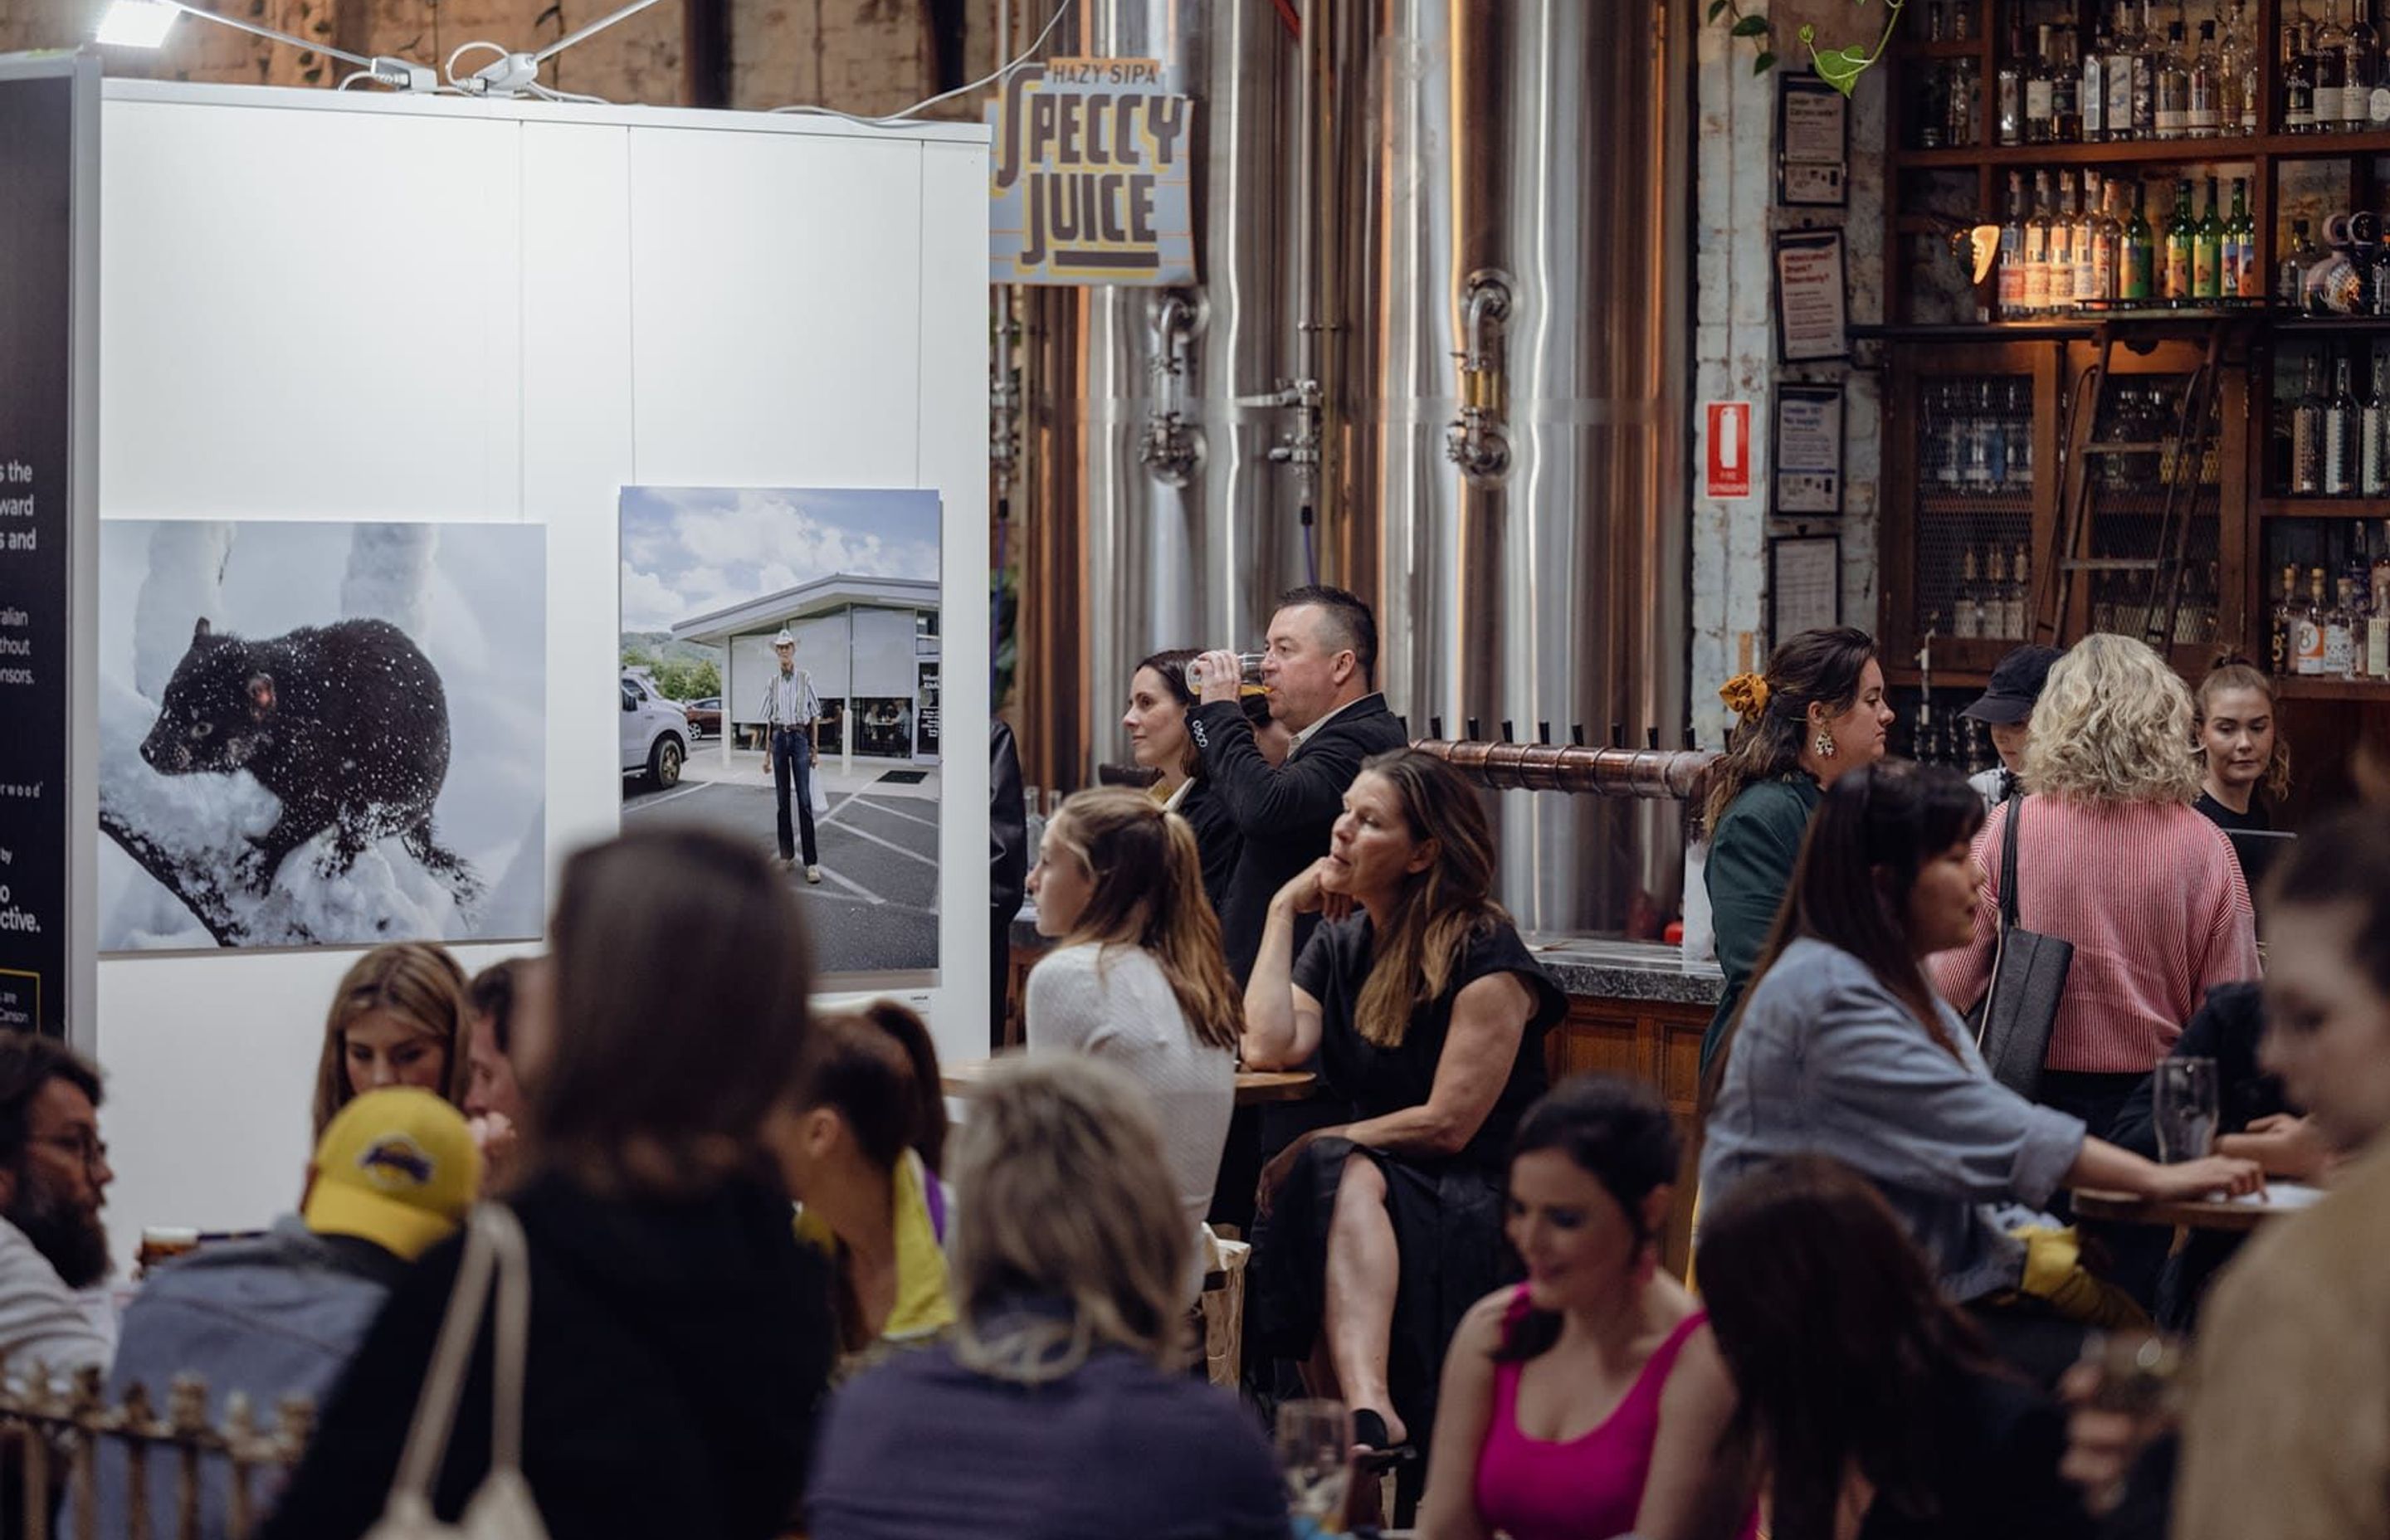 Transforming a brewery into an Exhibition Space